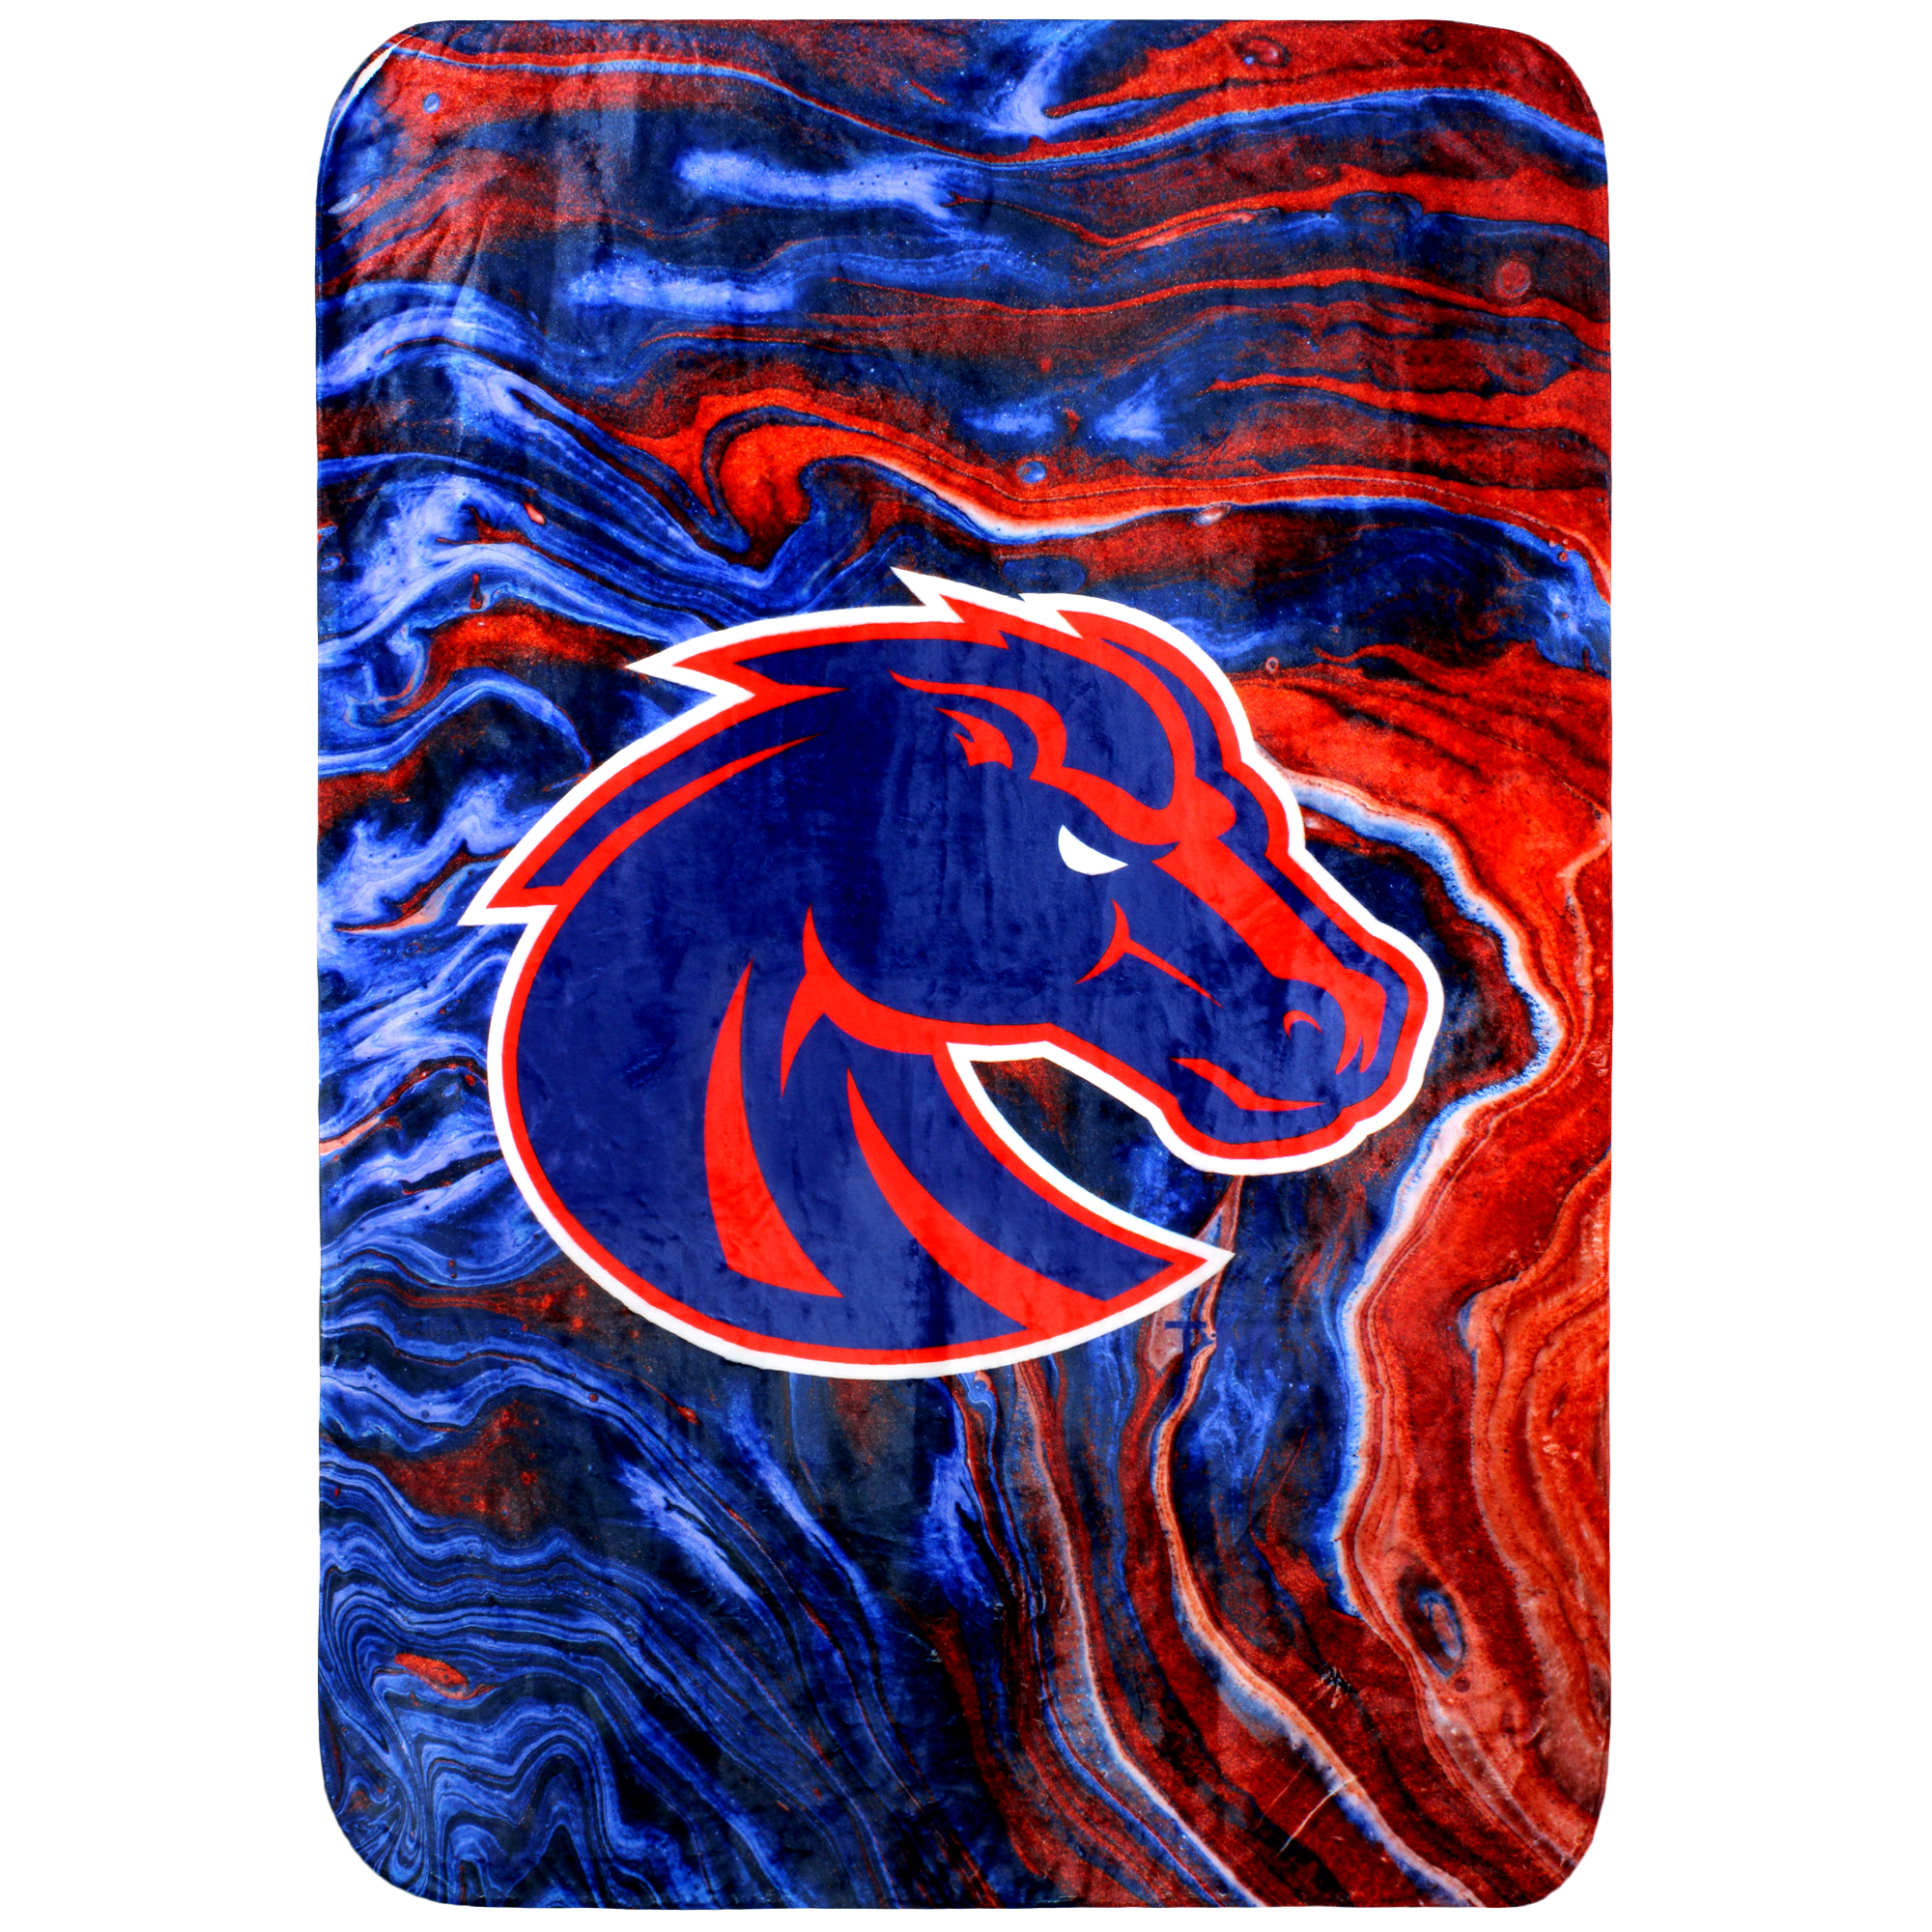 College Covers Boise State Broncos Sublimated Soft Throw Blanket, 42" x 60" - image 1 of 5